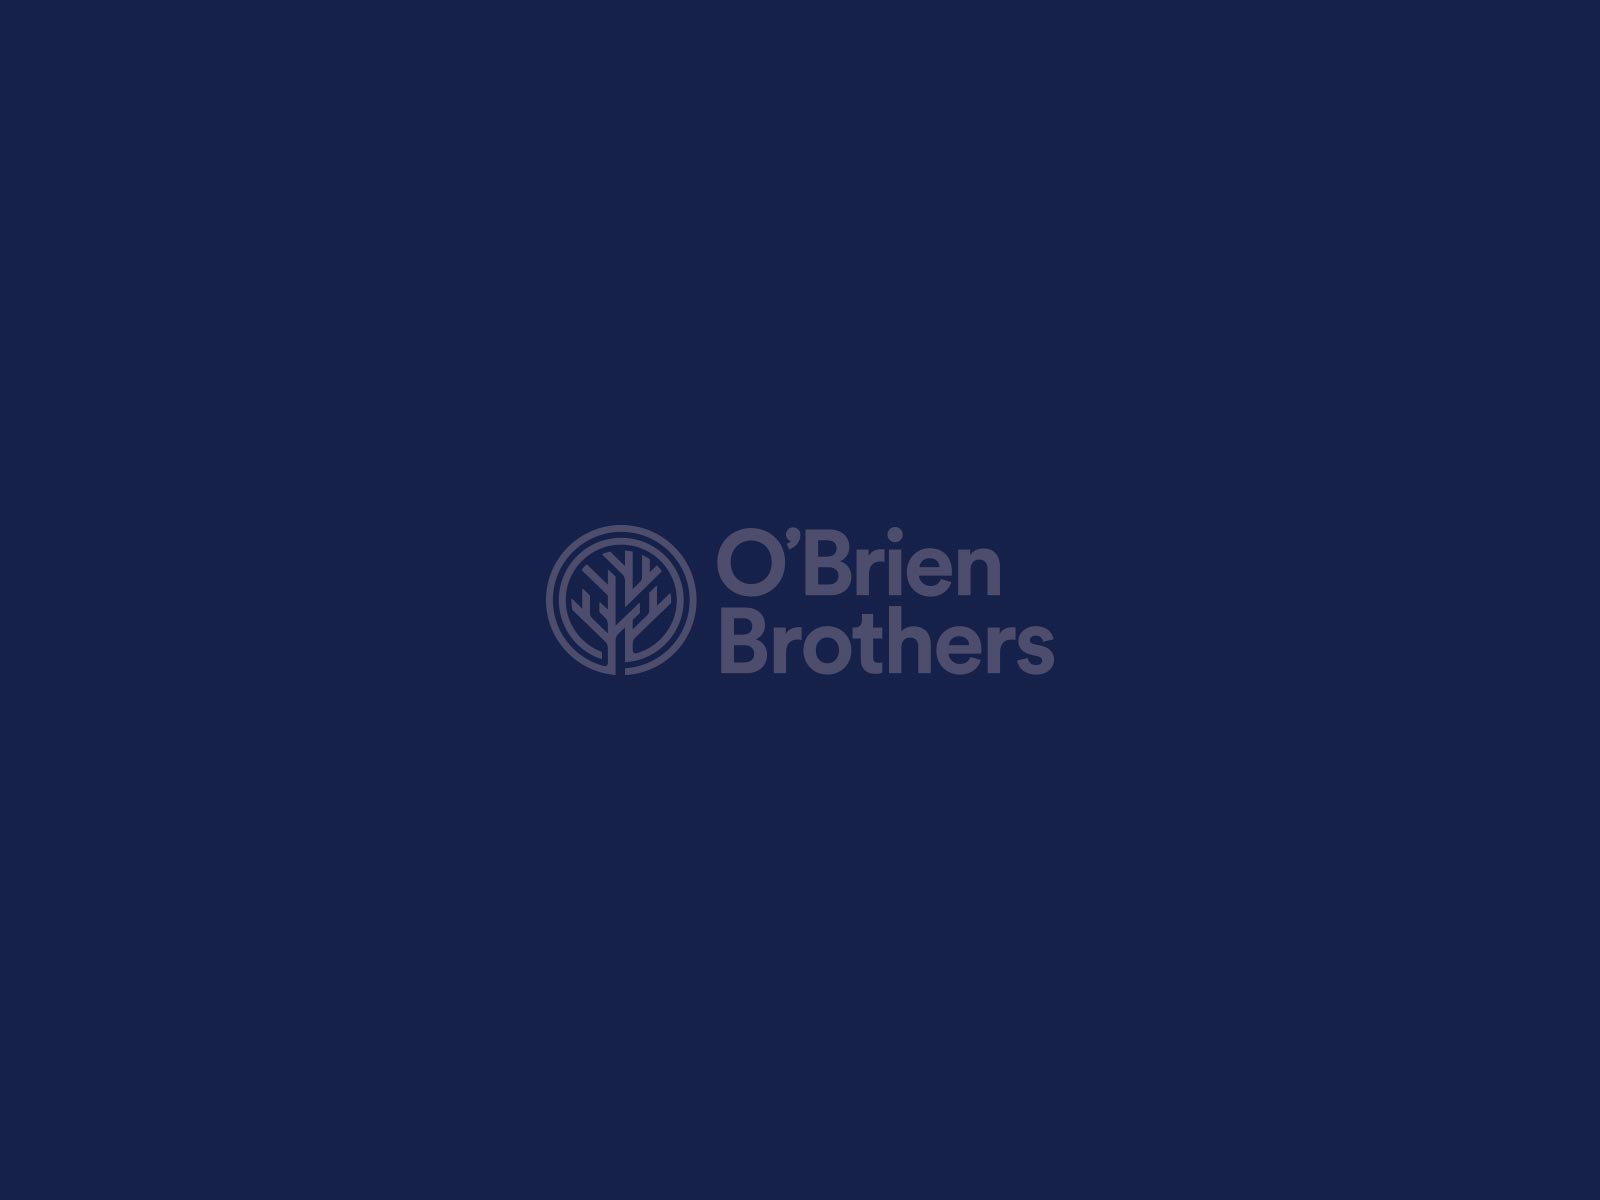 O'Brien Brothers Agency Inc